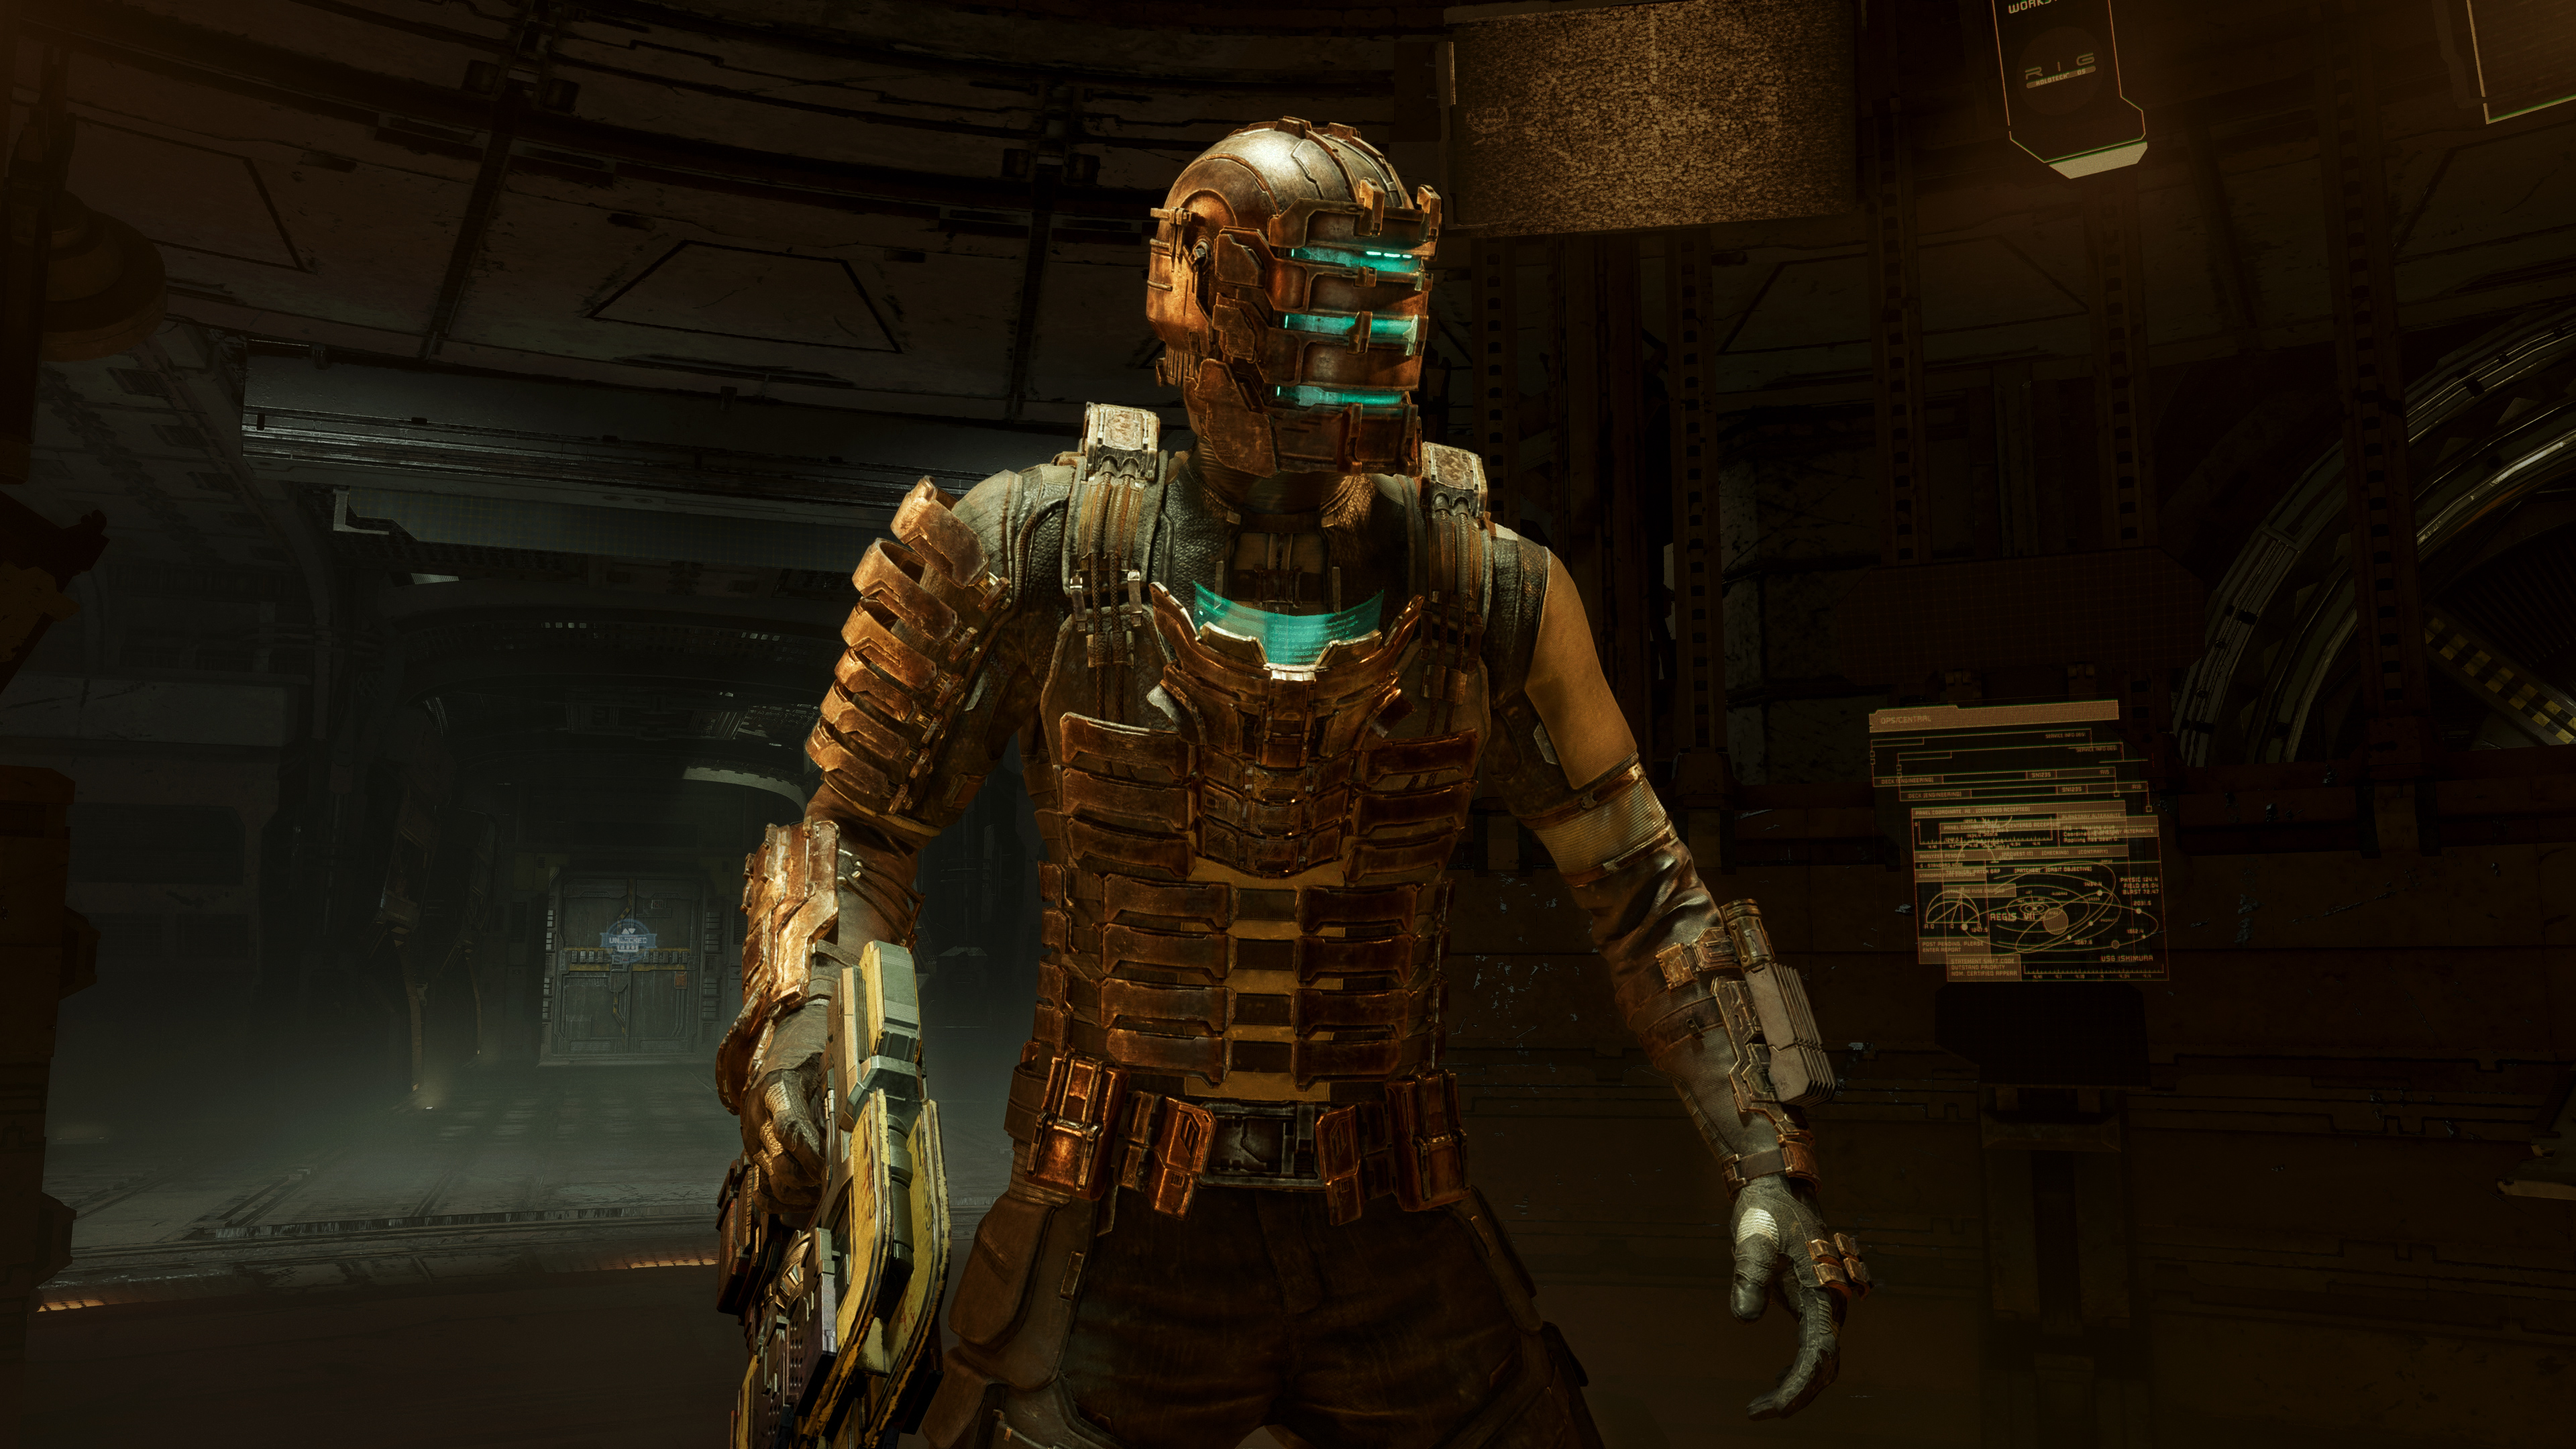 A screenshot of Isaac Clarke in his full RIG suit from the Dead Space remake